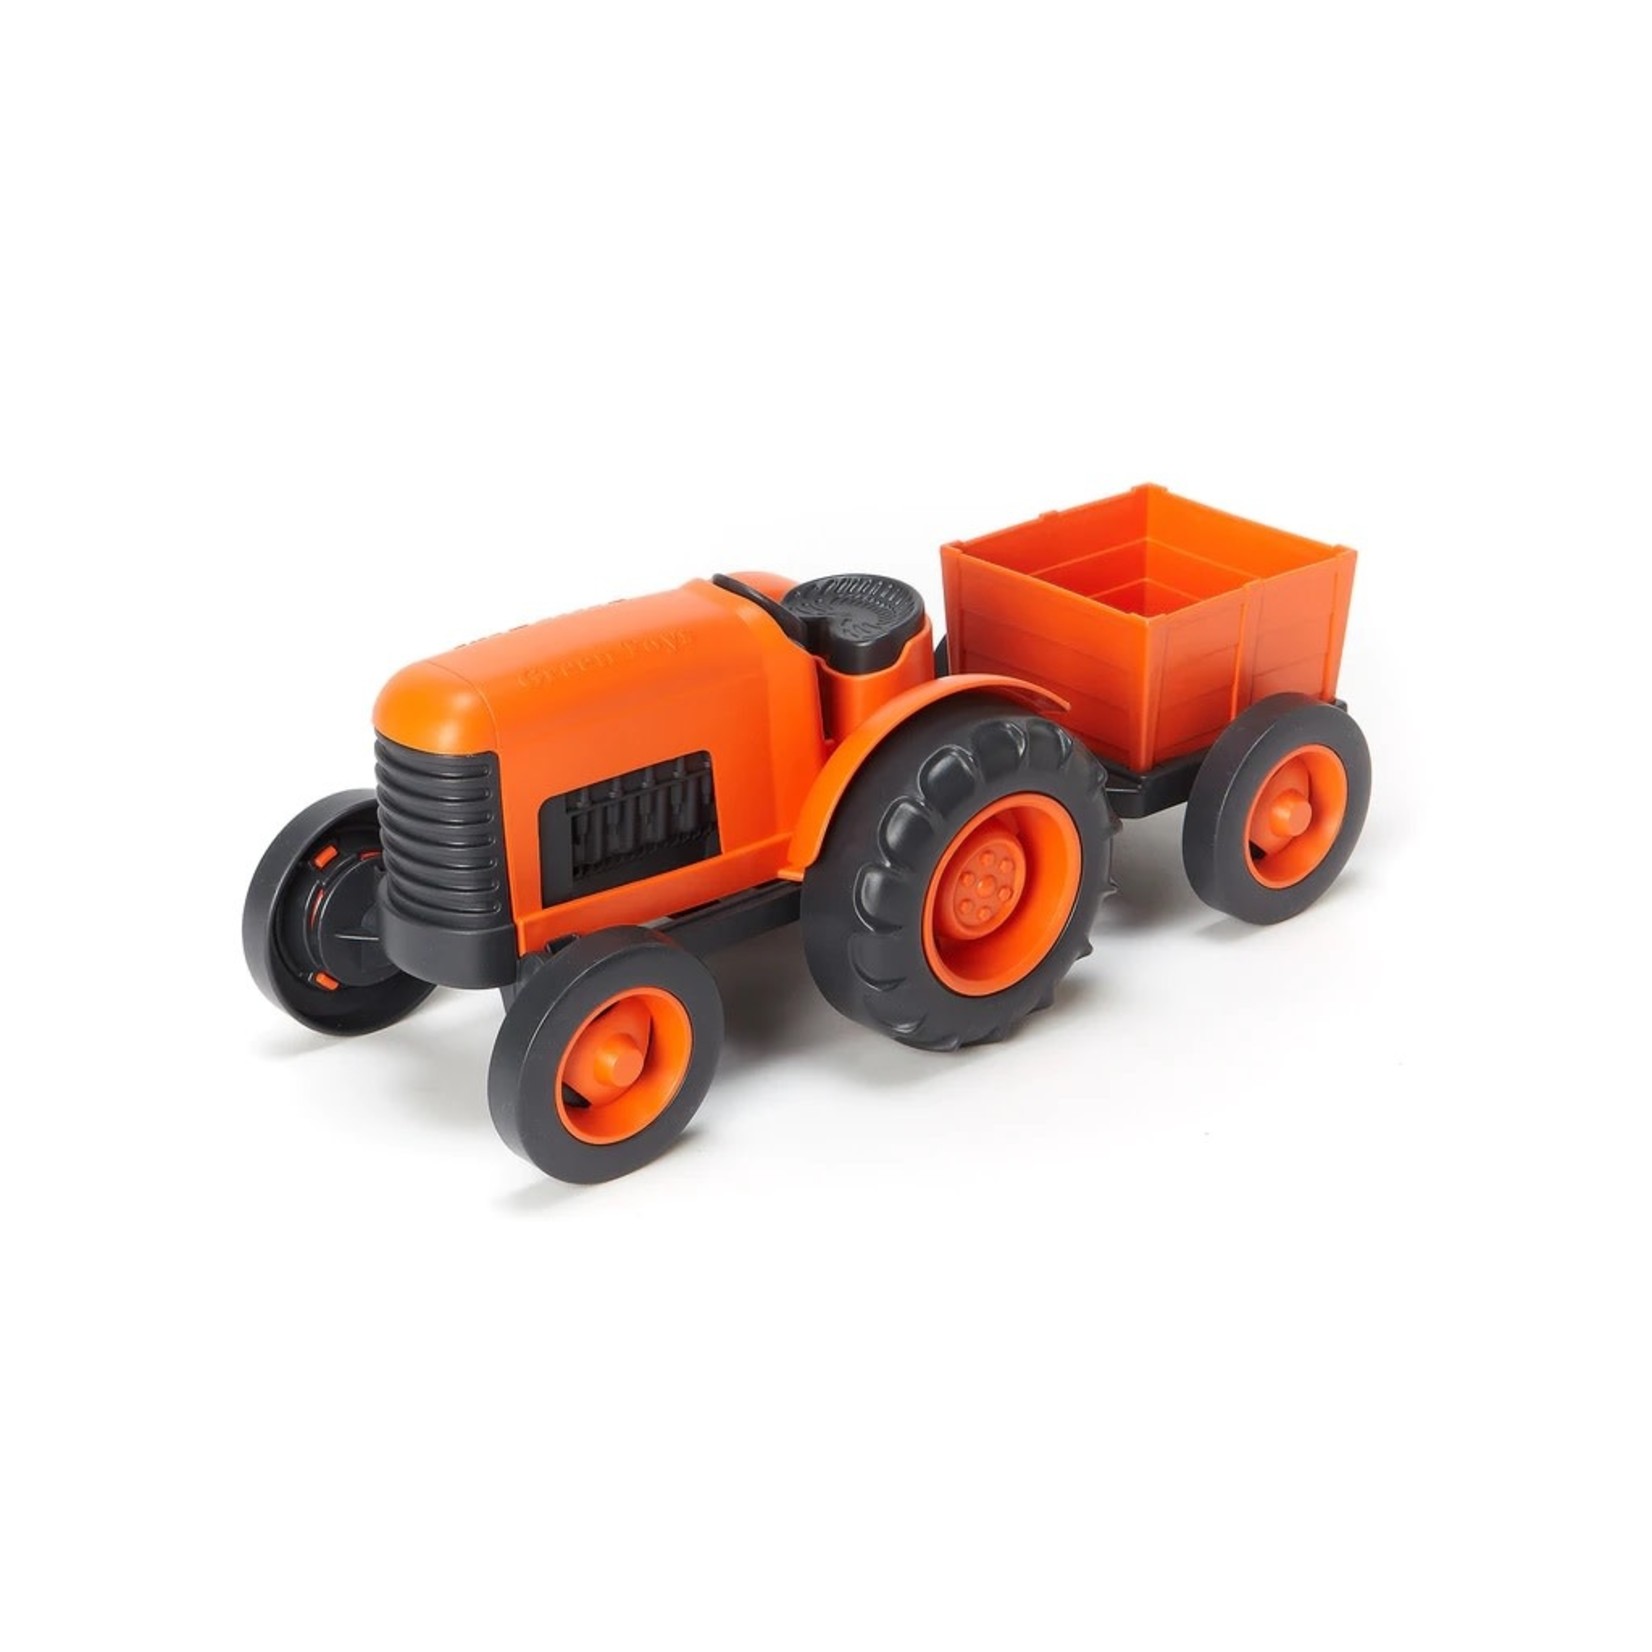 Green Toys - Tractor 1+